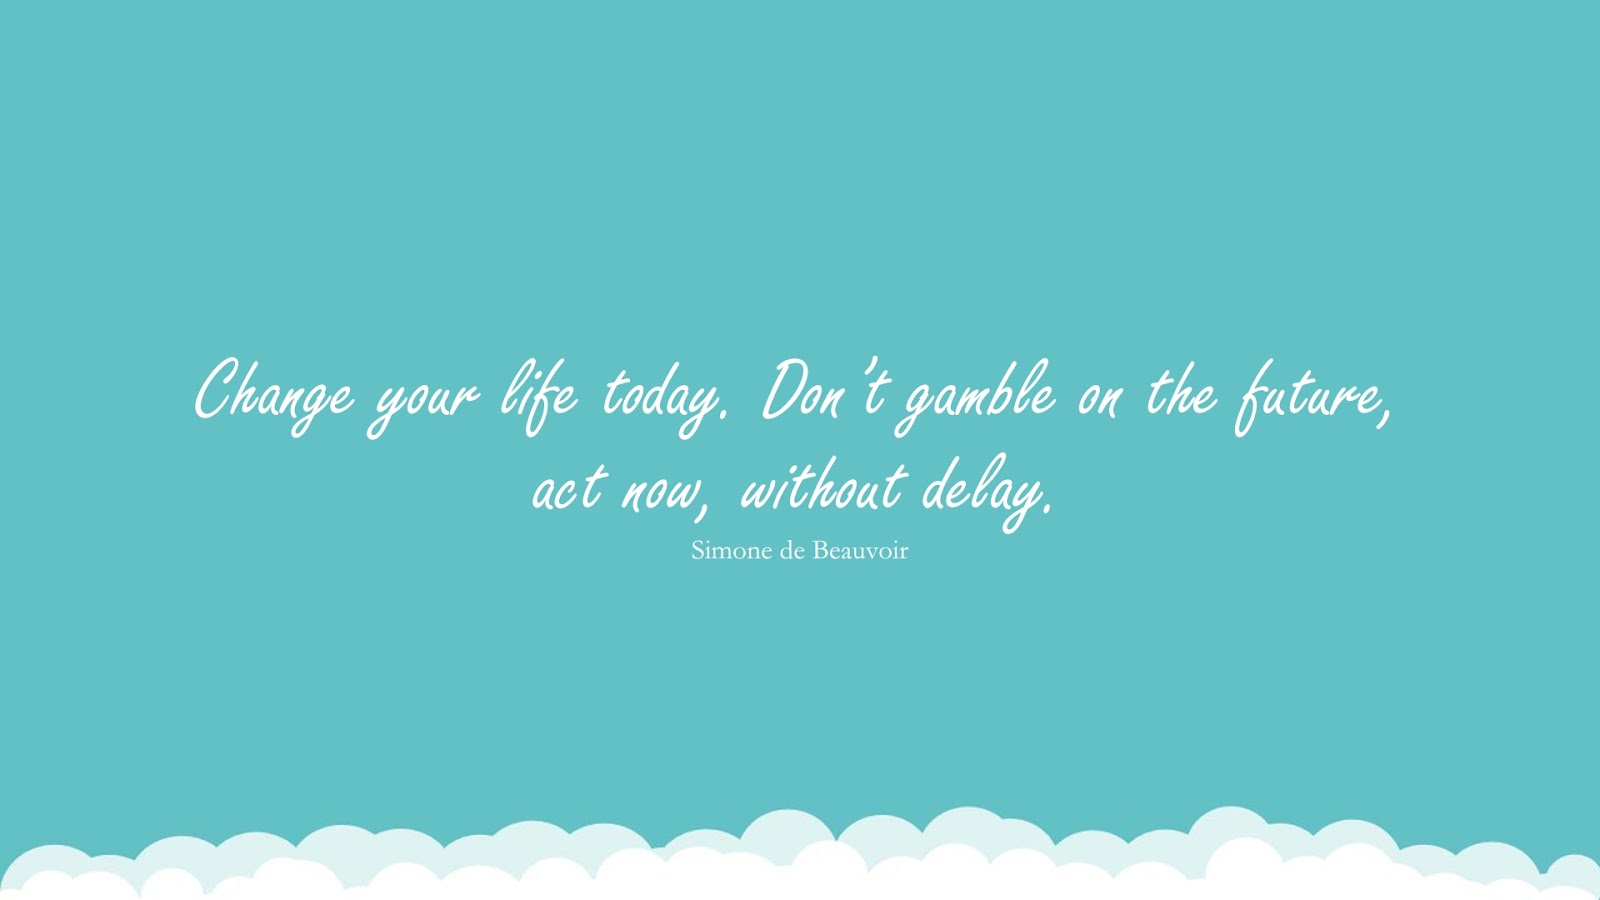 Change your life today. Don’t gamble on the future, act now, without delay. (Simone de Beauvoir);  #EncouragingQuotes